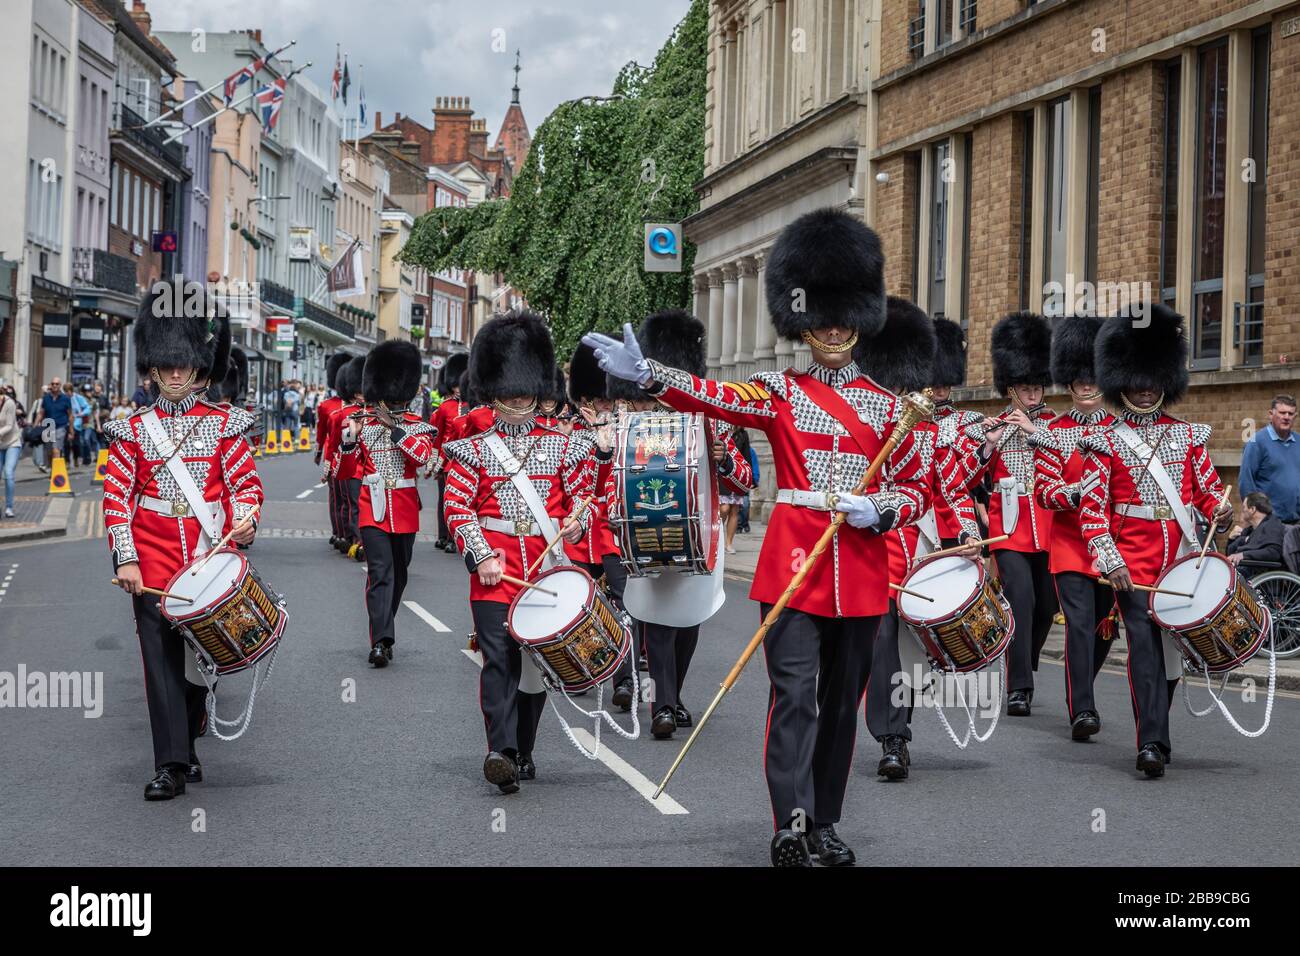 Corp of Drums of the Welsh Guards, Windsor, Berkshire, UK - May 28th 2019 Stock Photo